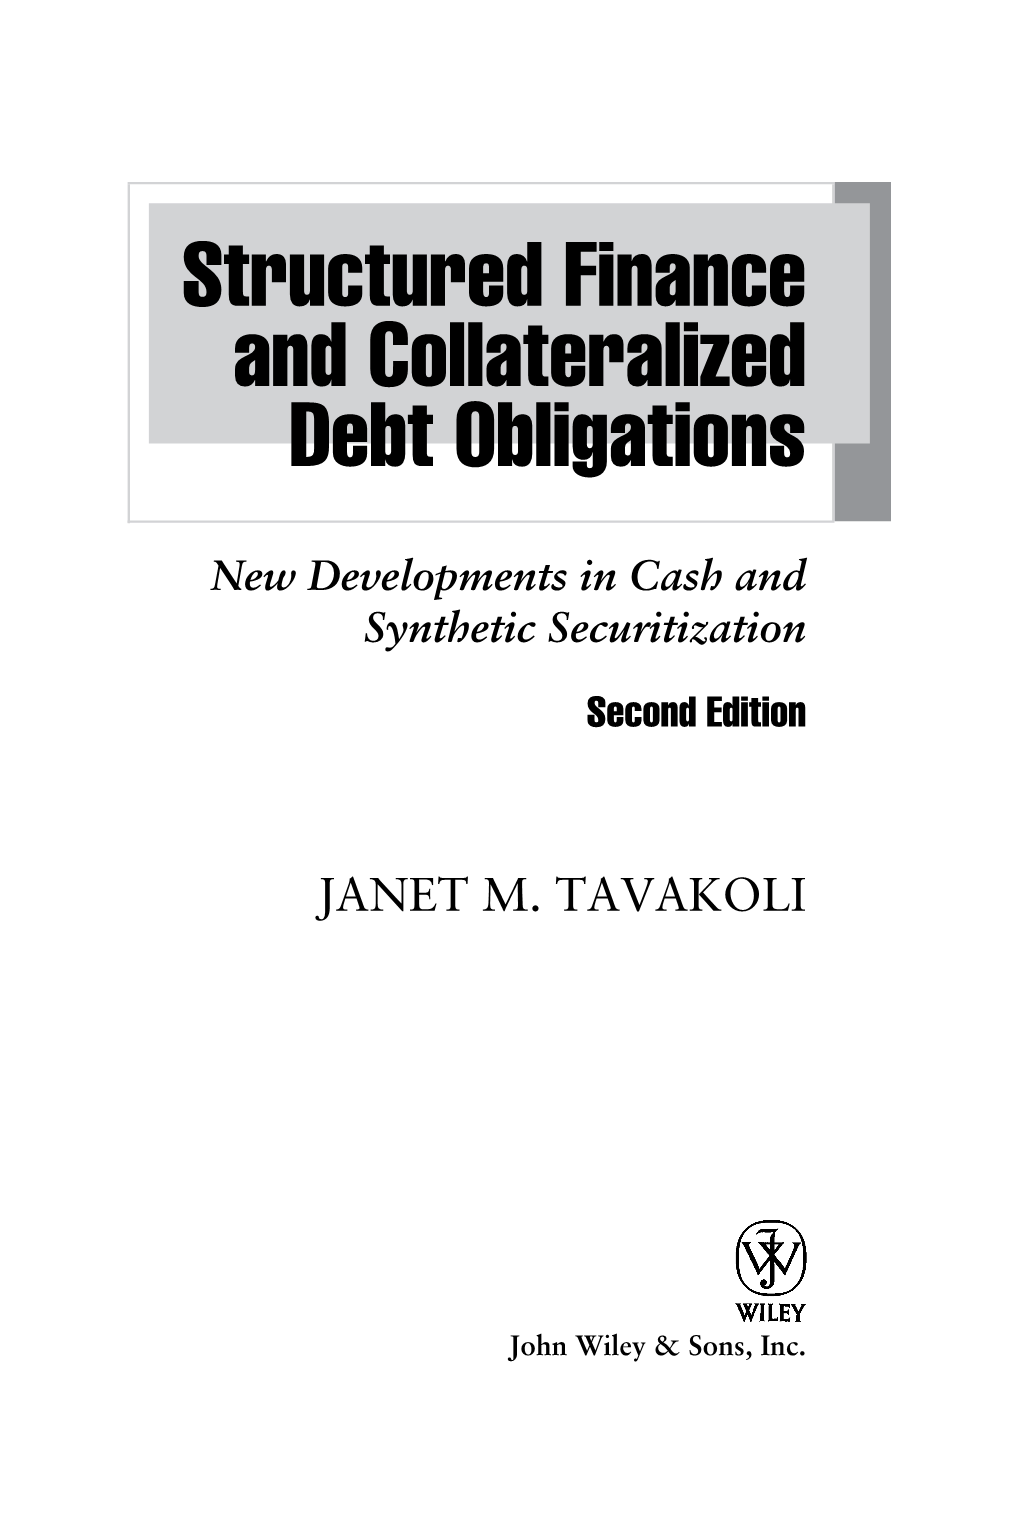 Structured Finance and Collateralized Debt Obligations